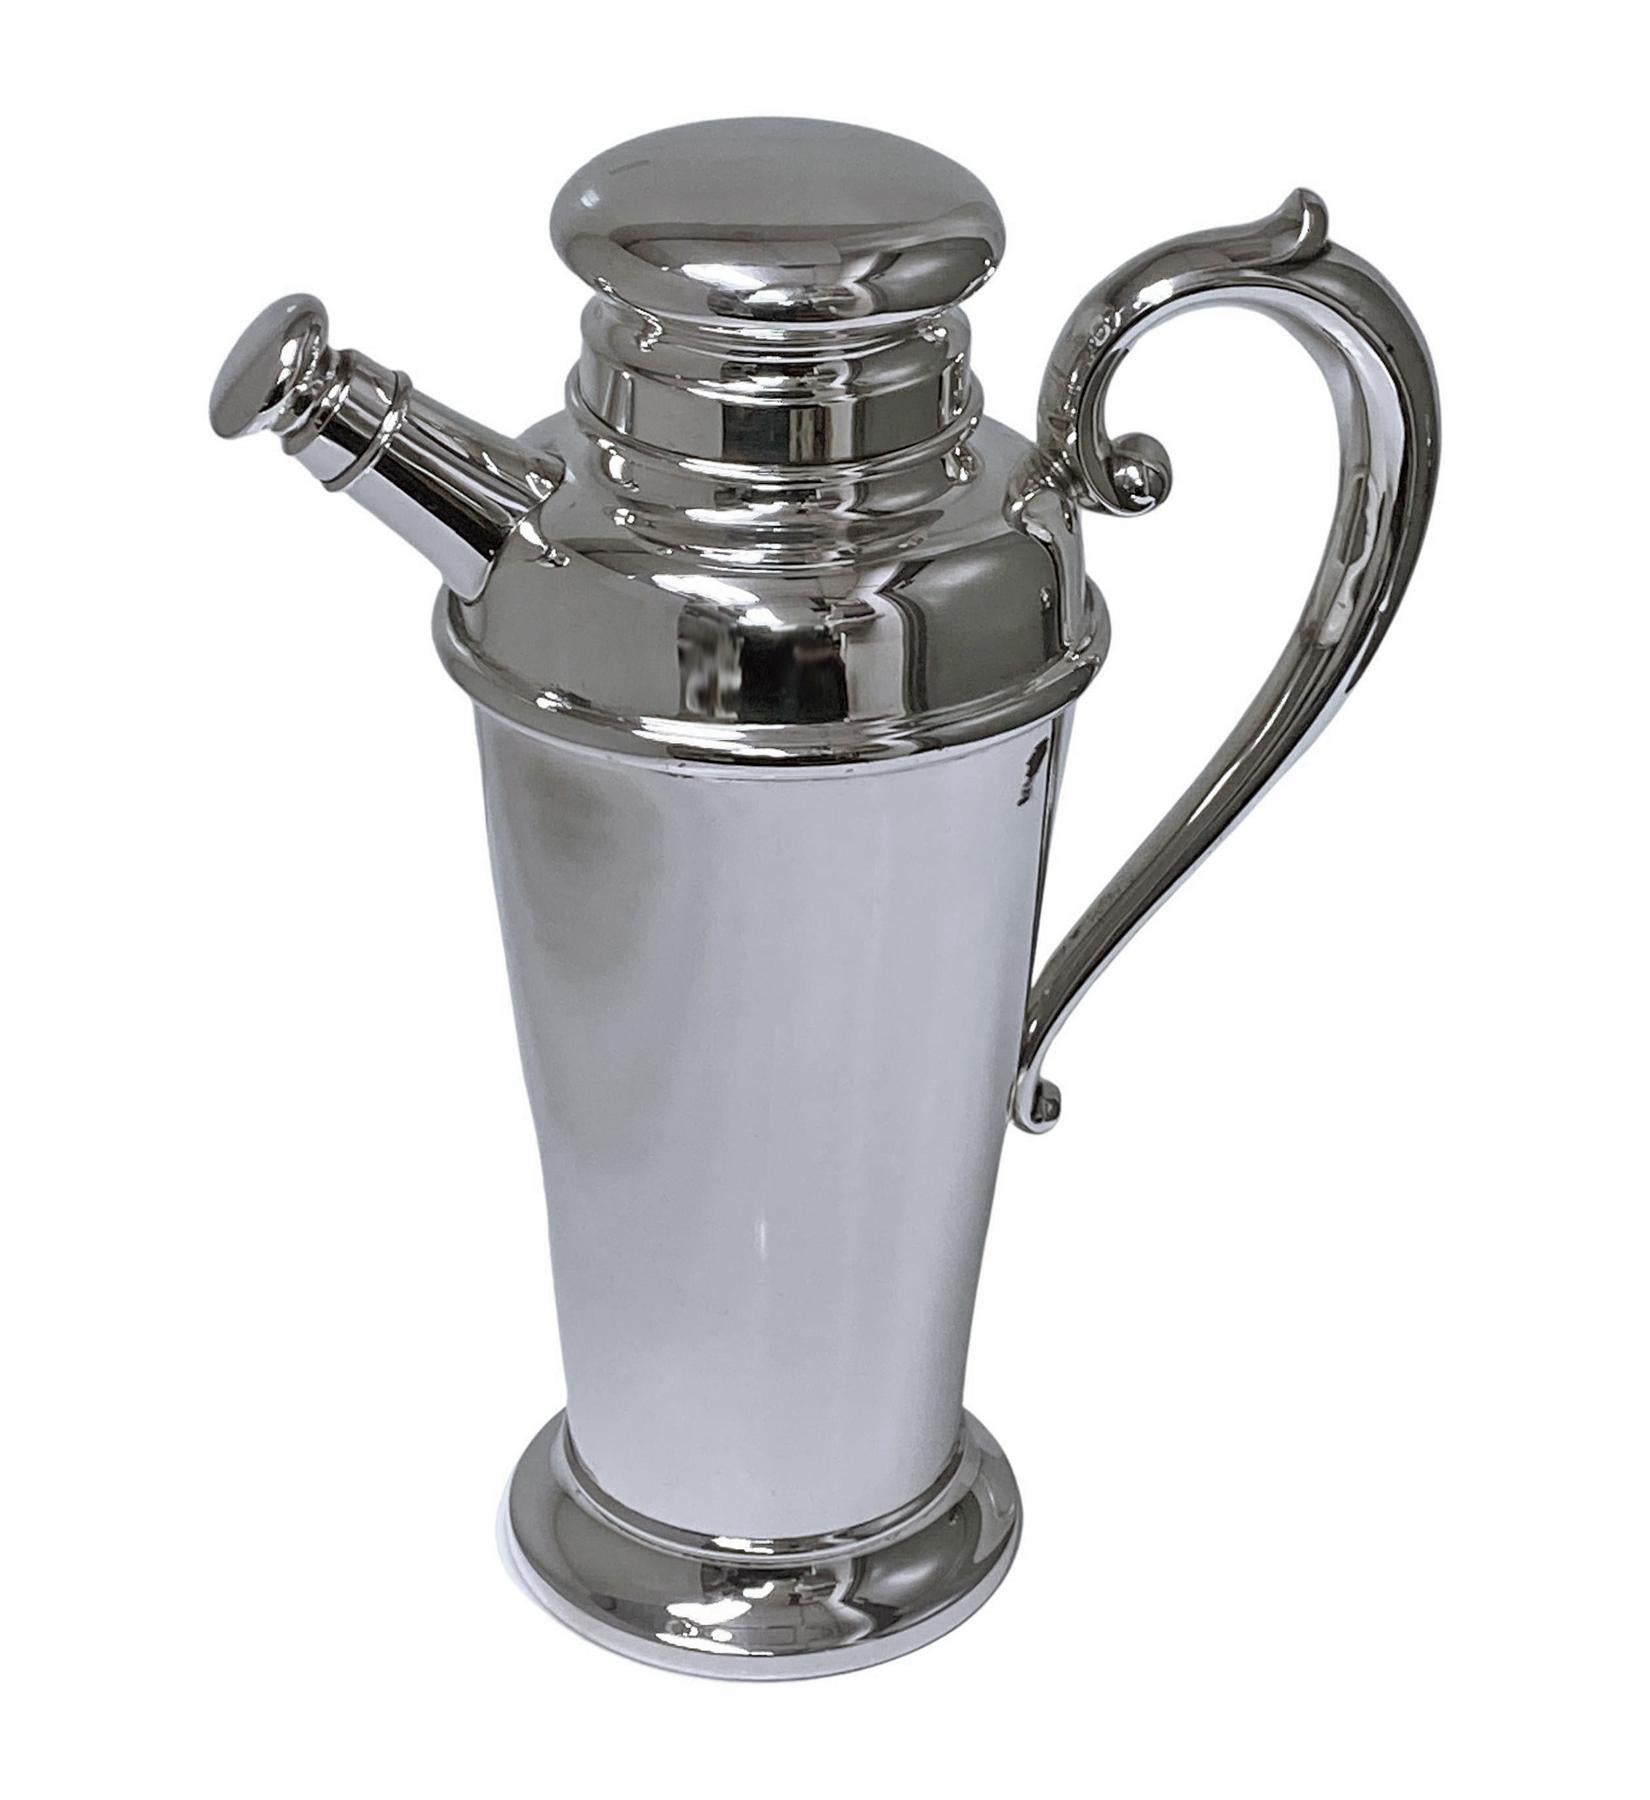 Art Deco American Sterling Silver cocktail shaker Manchester Silver Co C.1930. The shaker of plain tapering cylindrical form scroll handle, spreading circular foot, Removable pouring cover, pull-off domed lid. Height: 10.5 inches. Handle to spout: 8